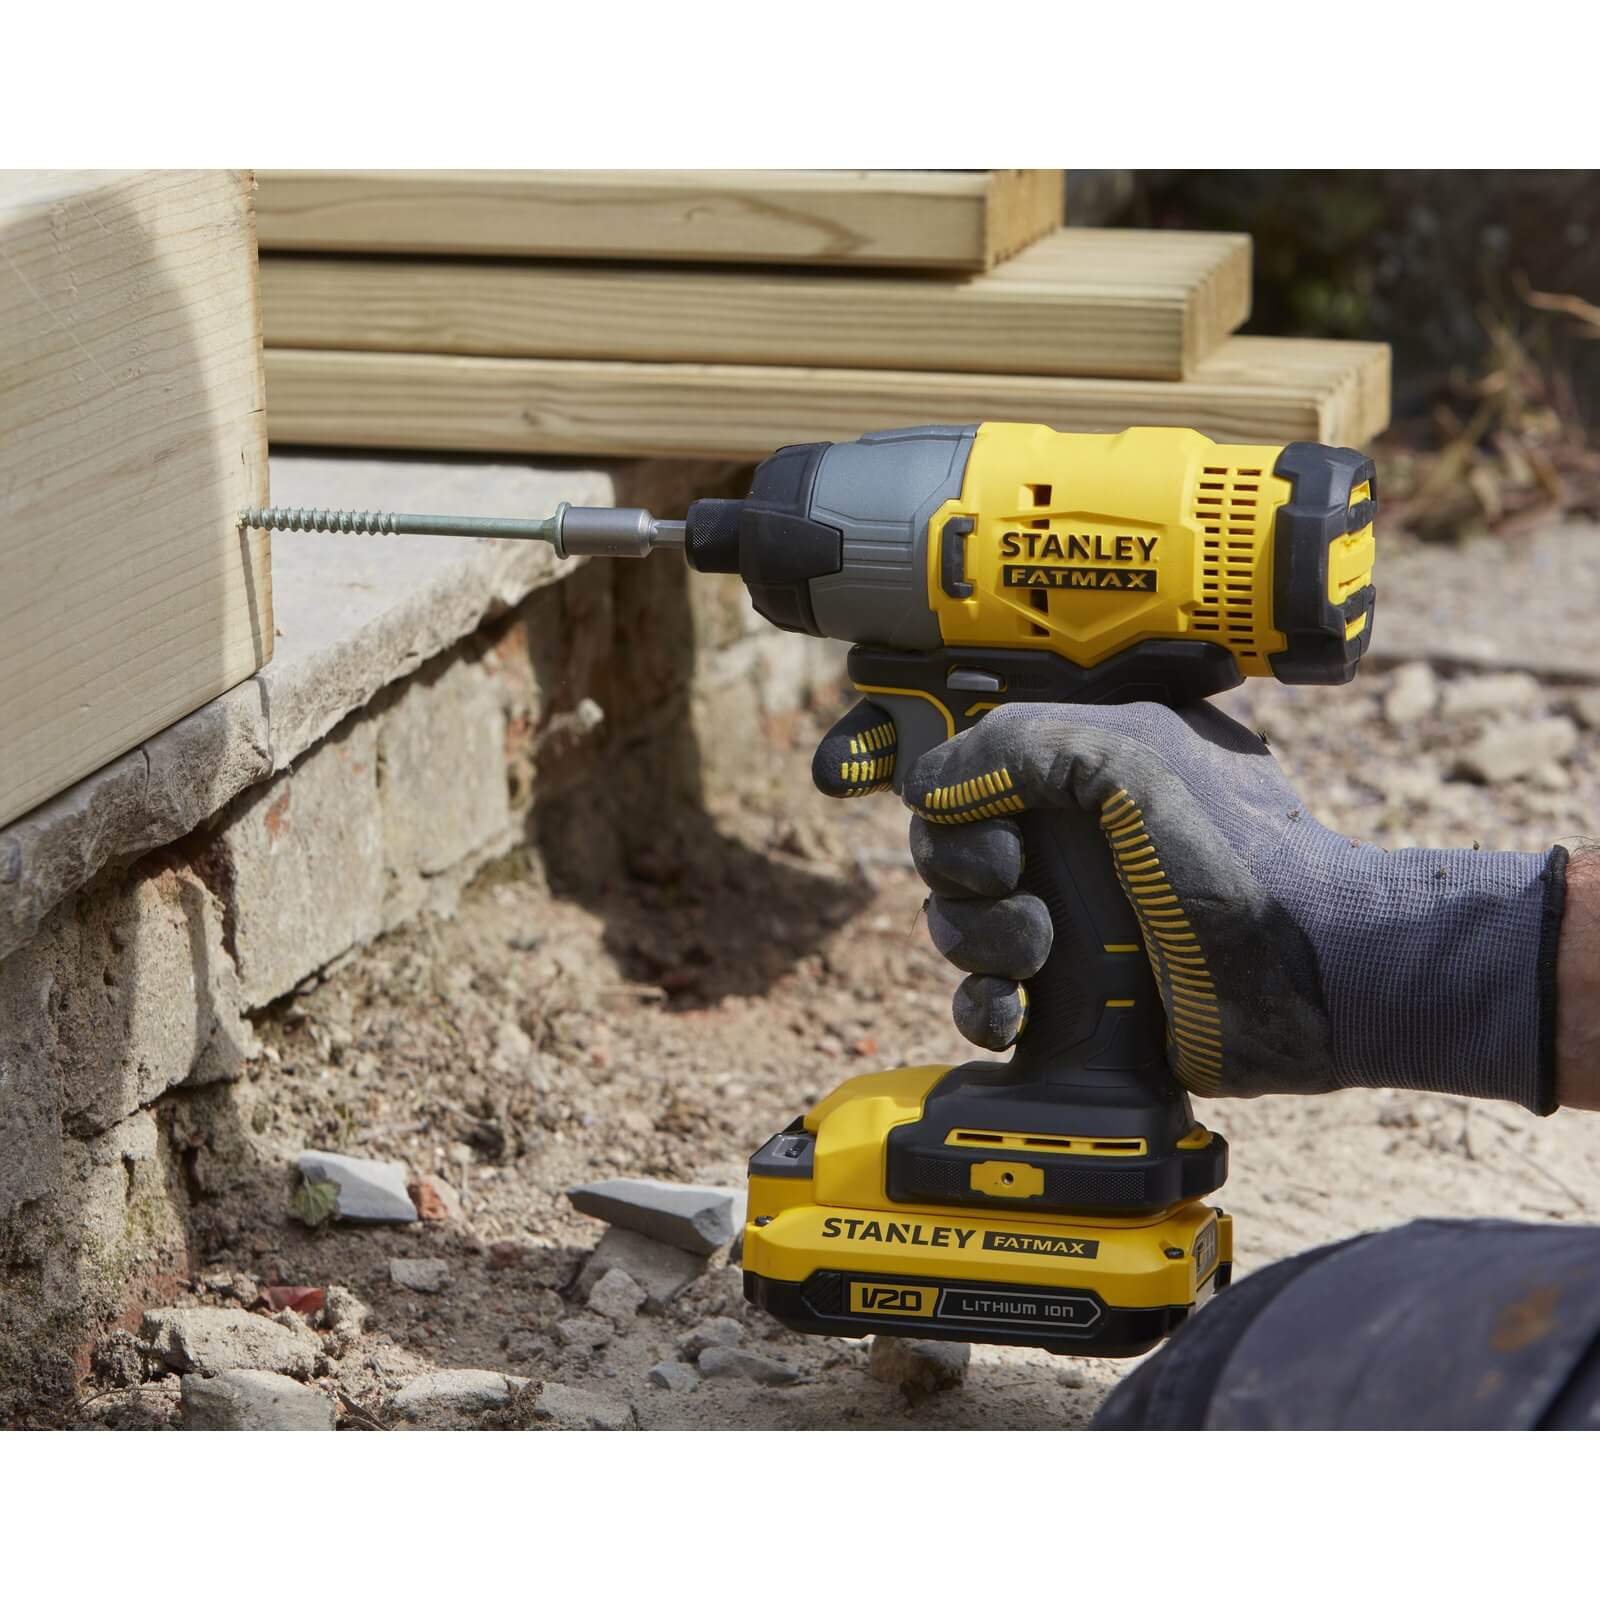 STANLEY FATMAX V20 18V Cordless Combi Drill and Impact Driver Kit with Soft Bag (SFMCK465D2S-GB)